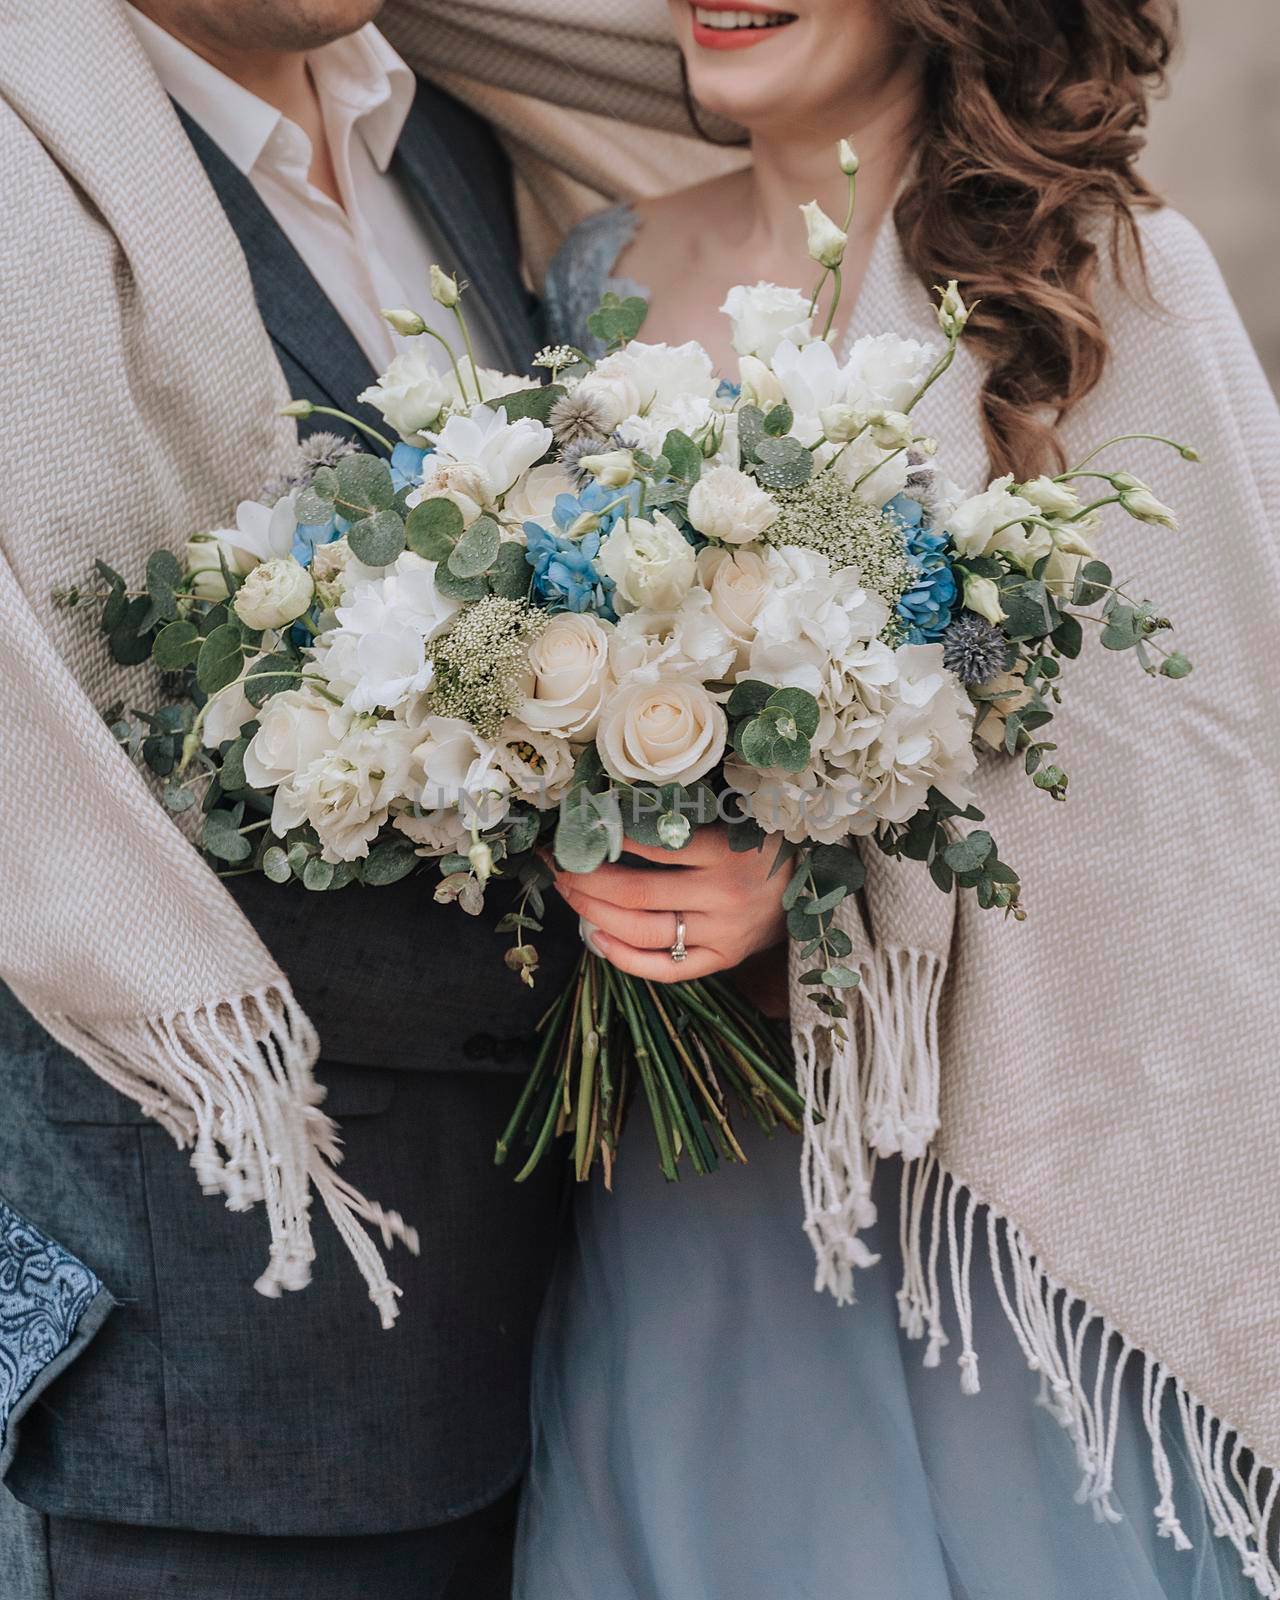 the couple is embracing holding a beautiful bouquet of flowers, the girl is wearing a blue long dress, the man is wearing a suit and a plaid is thrown over. wedding concept by Matiunina